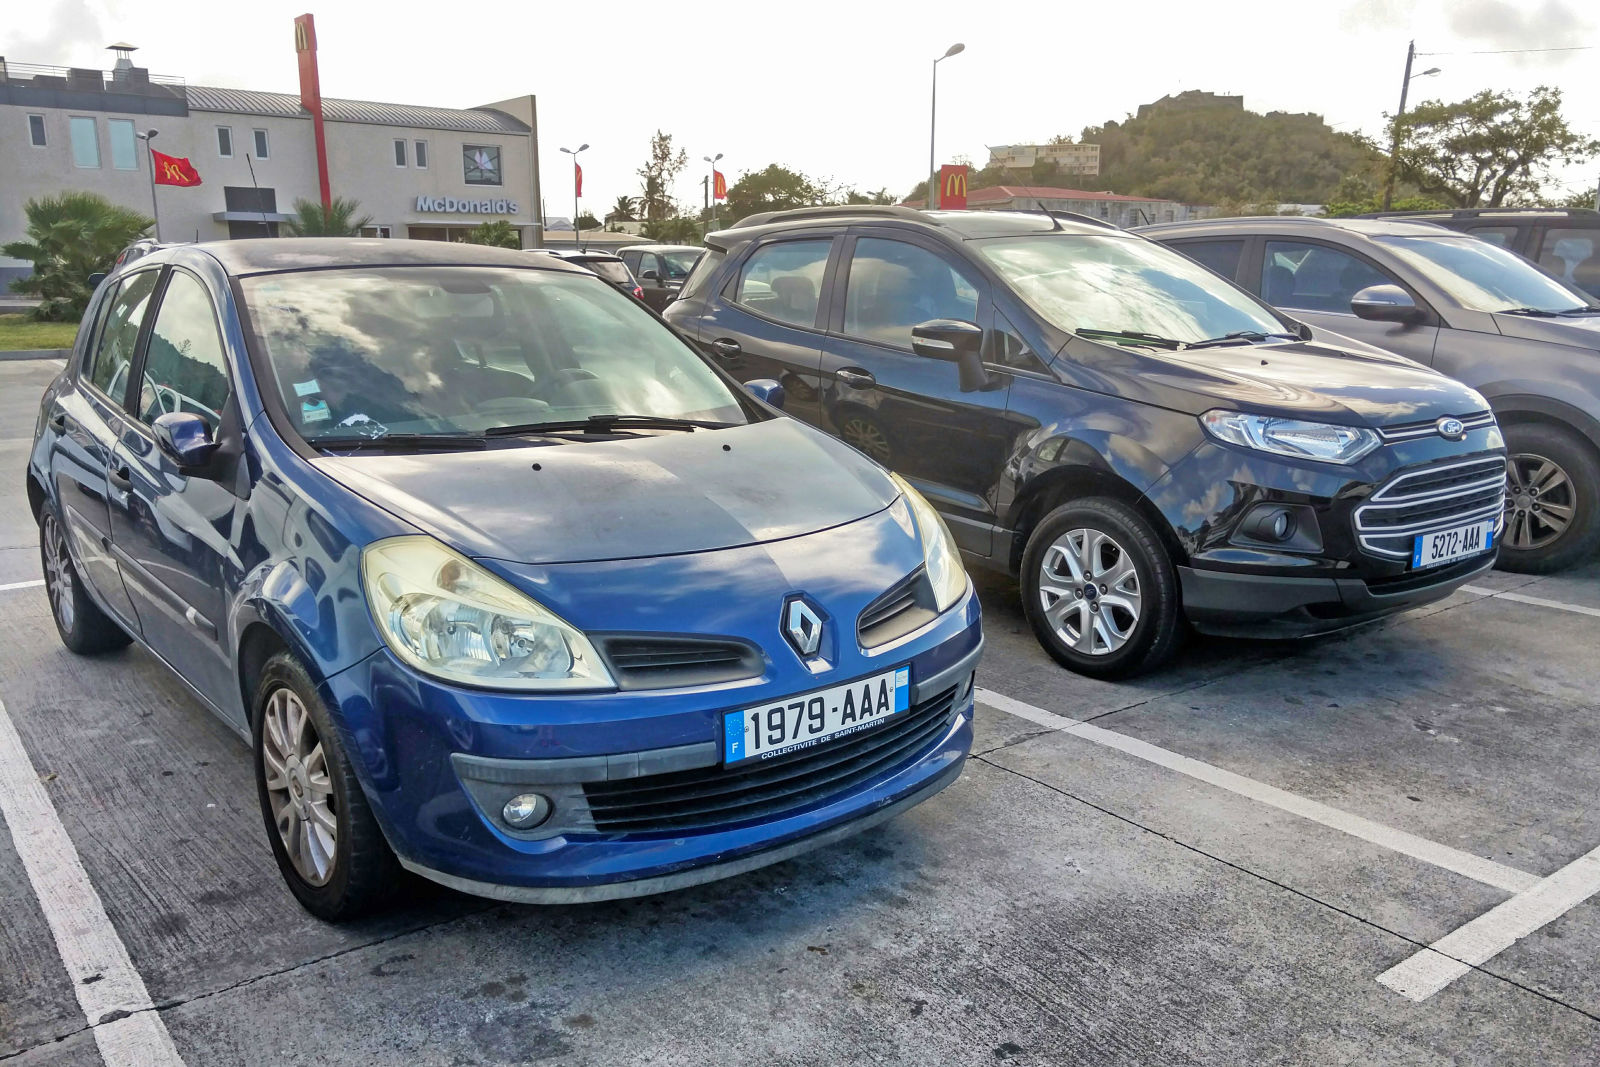 Renault Clio III and a Ford EcoSport, their subcompact CUV that competes against the likes of the Honda HR-V